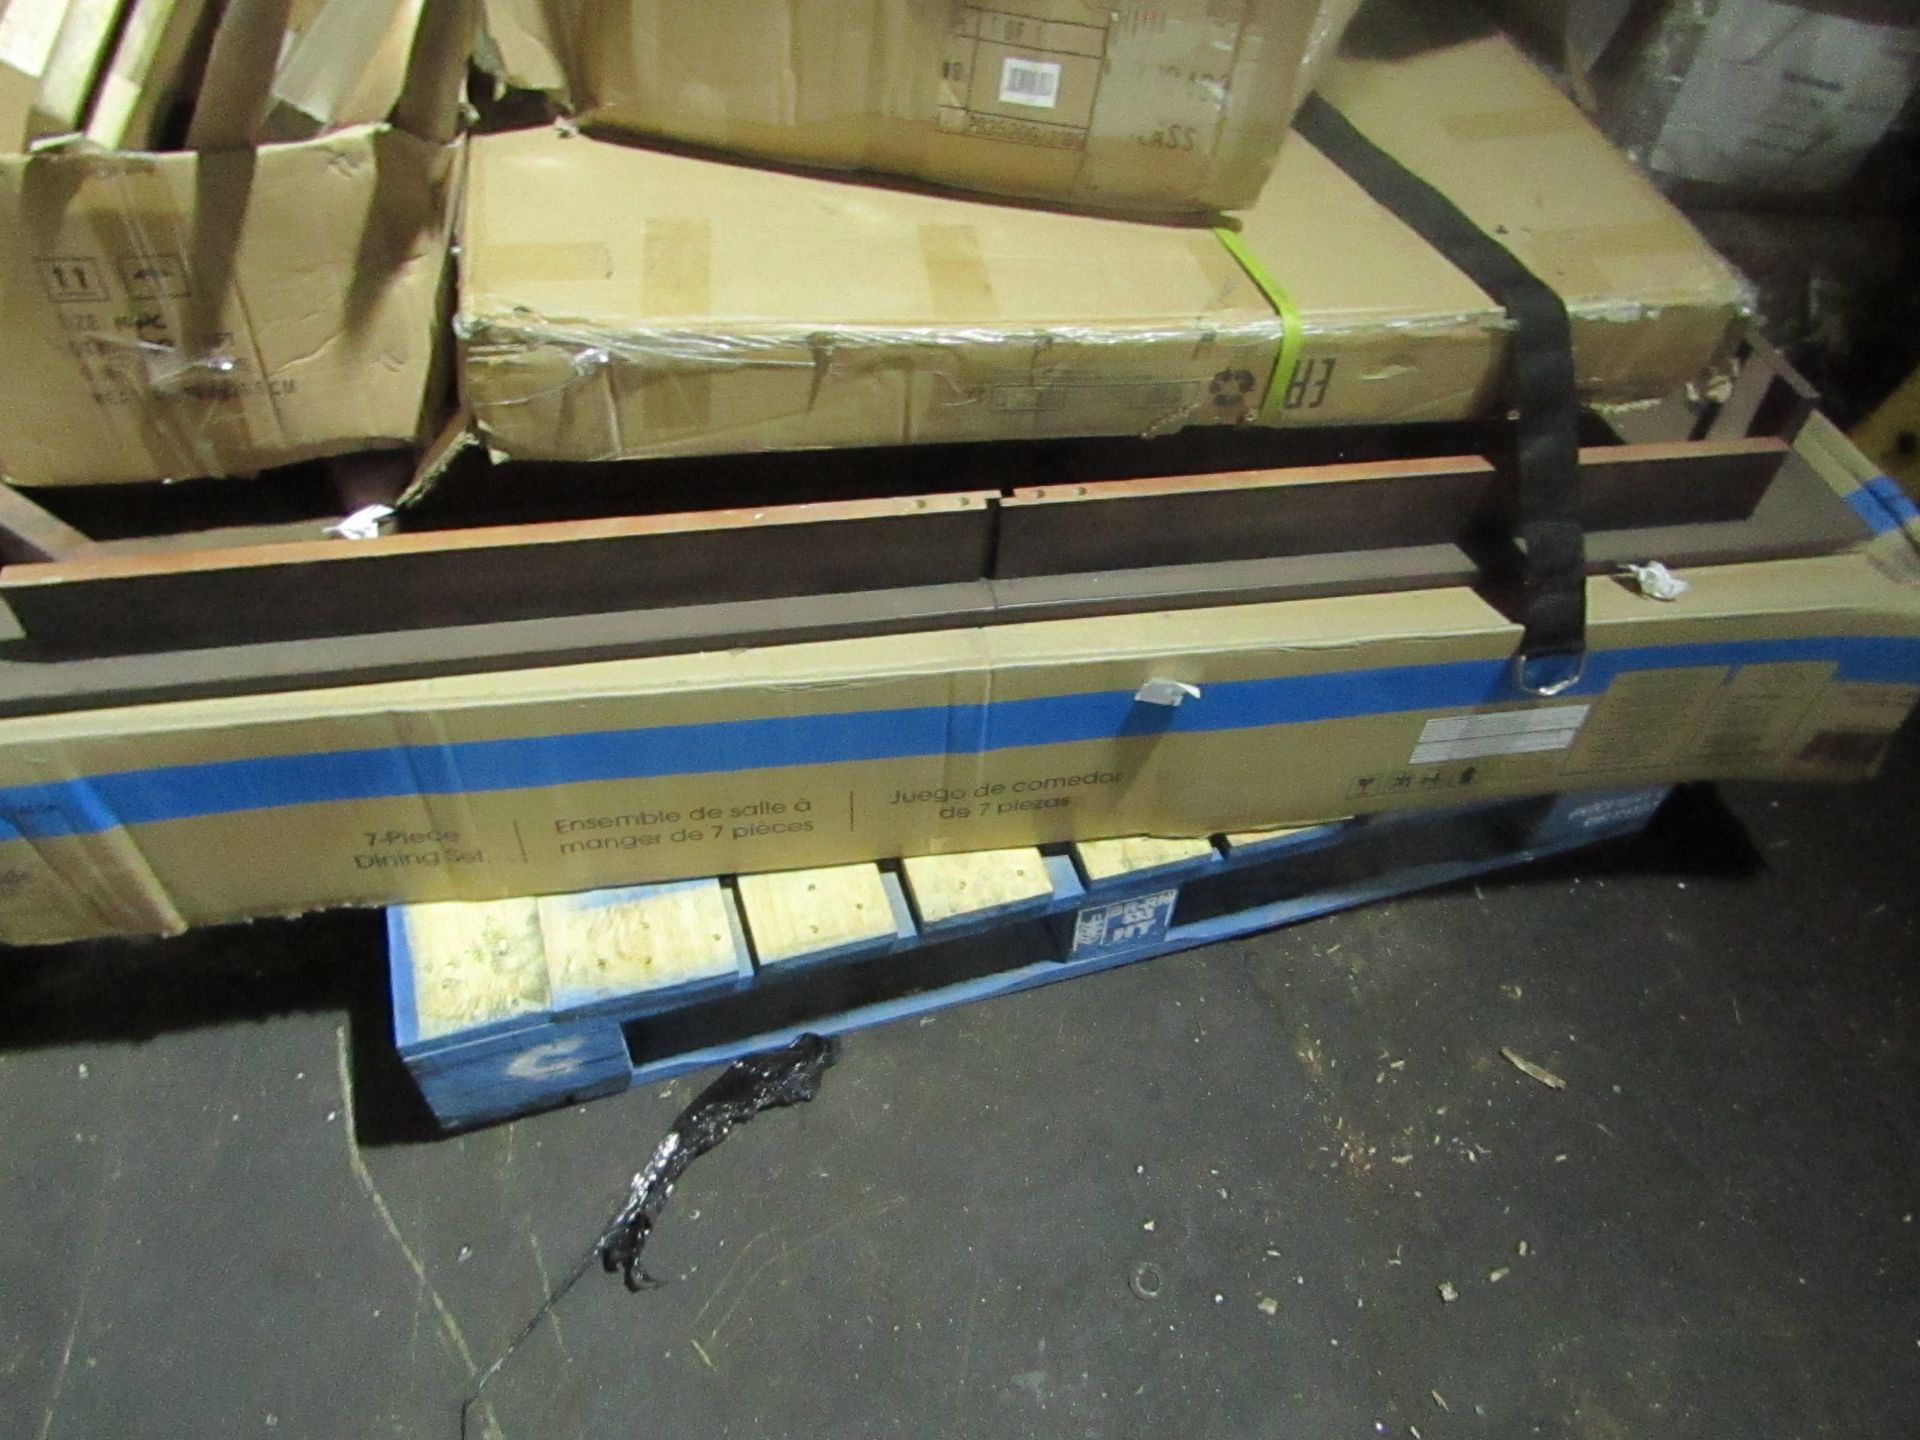 Pallet of mixed customer returns furnitiure. All unchecked